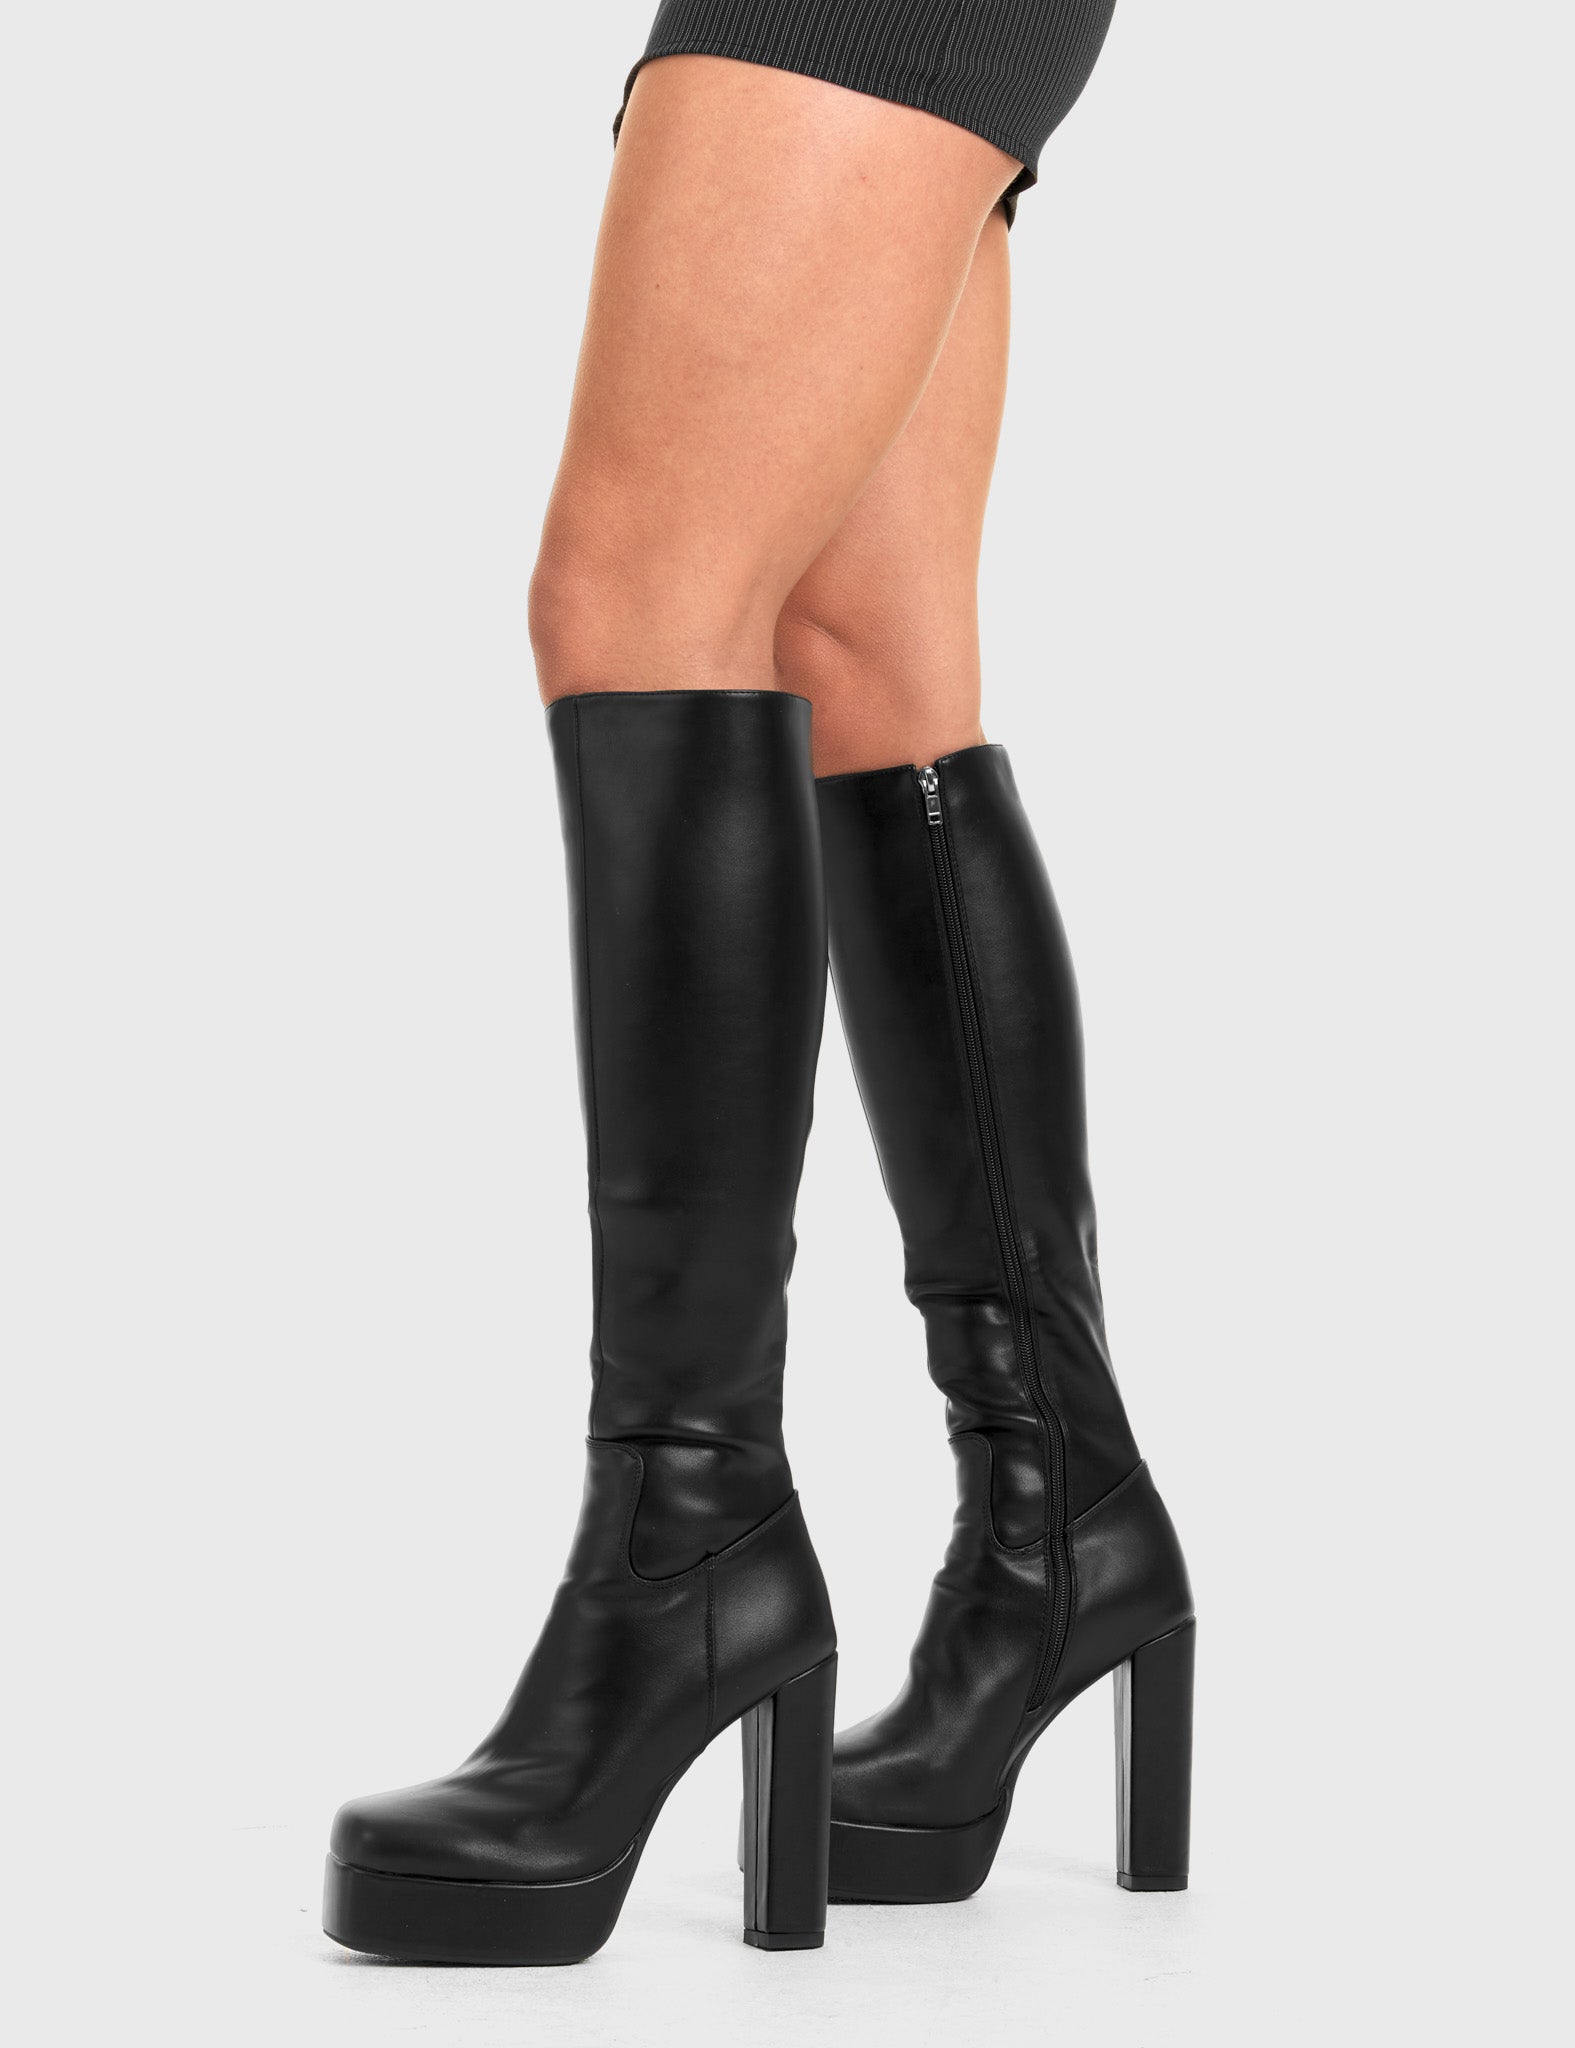 Guide to Vegan Knee High Boots: Stay Stylish and Cruelty-Free